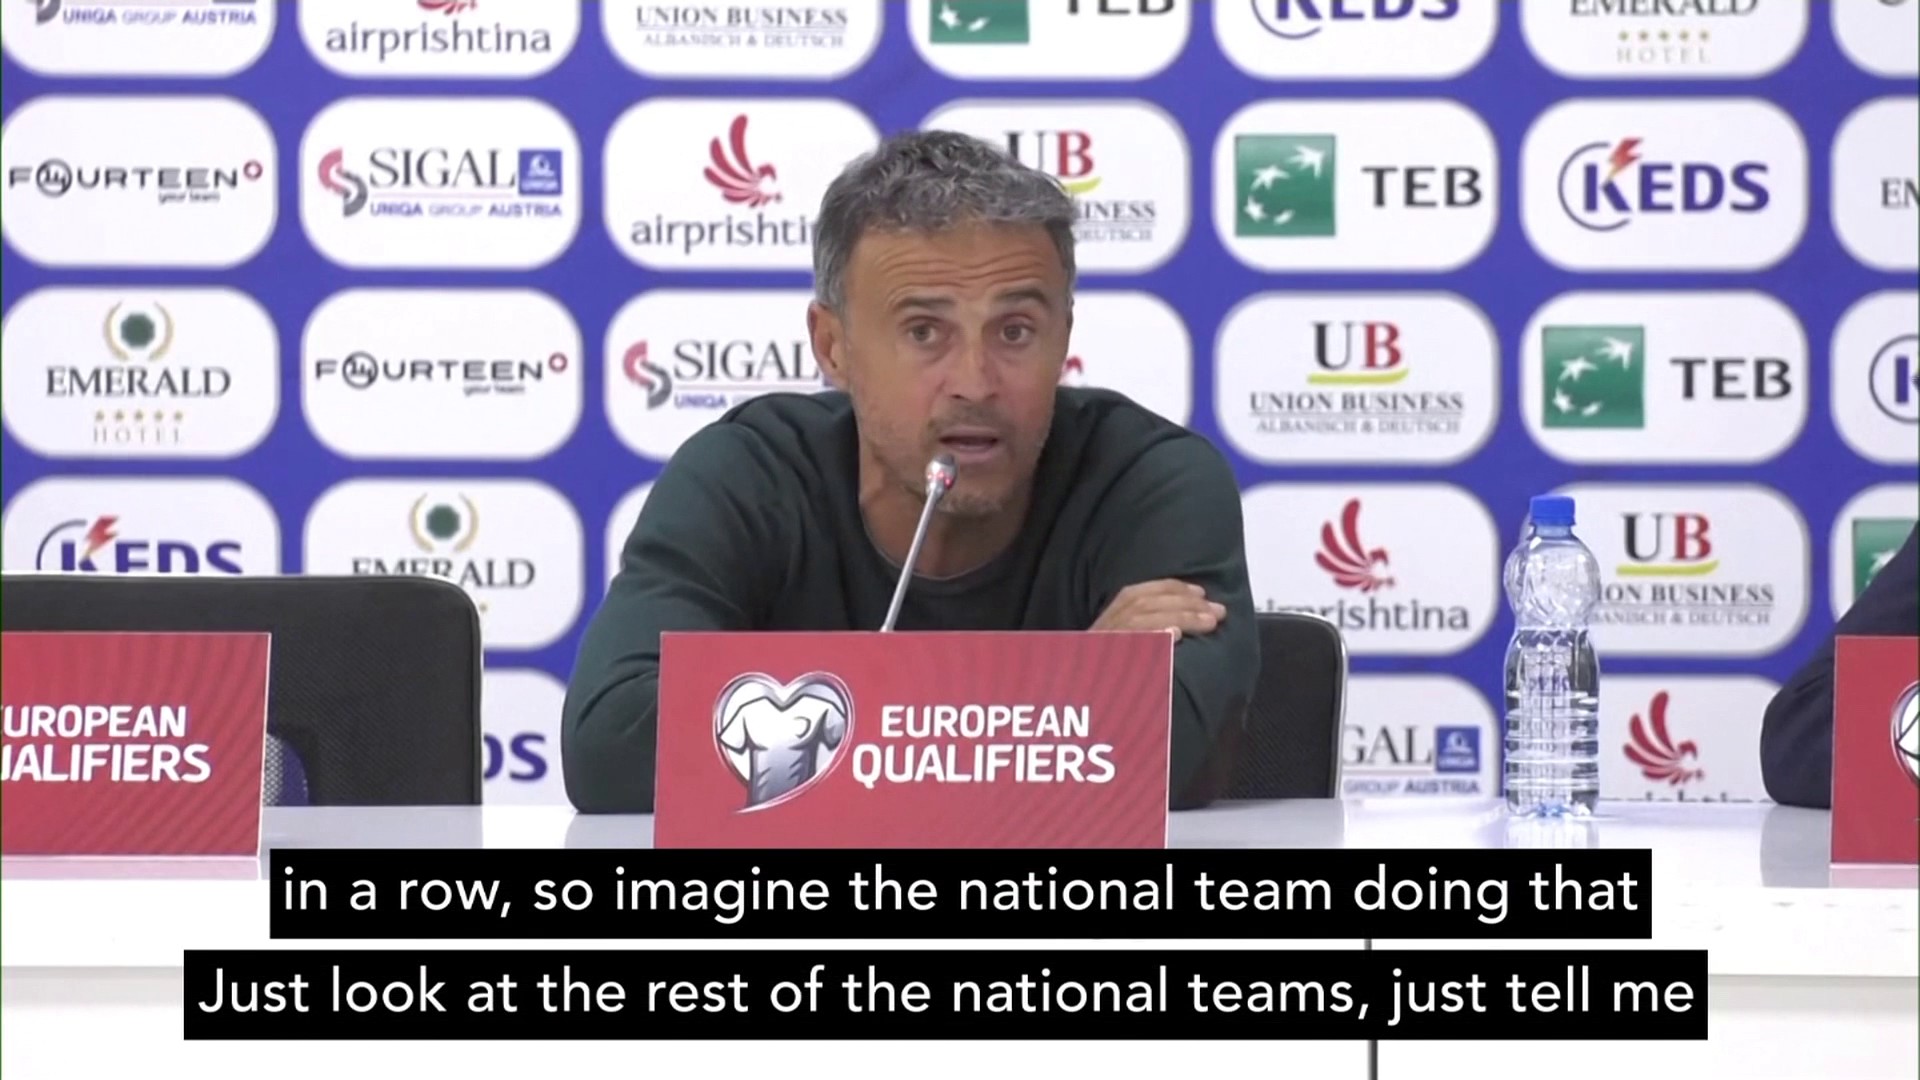 Luis Enrique: "Does anyone have any doubts that football is levelling out?"